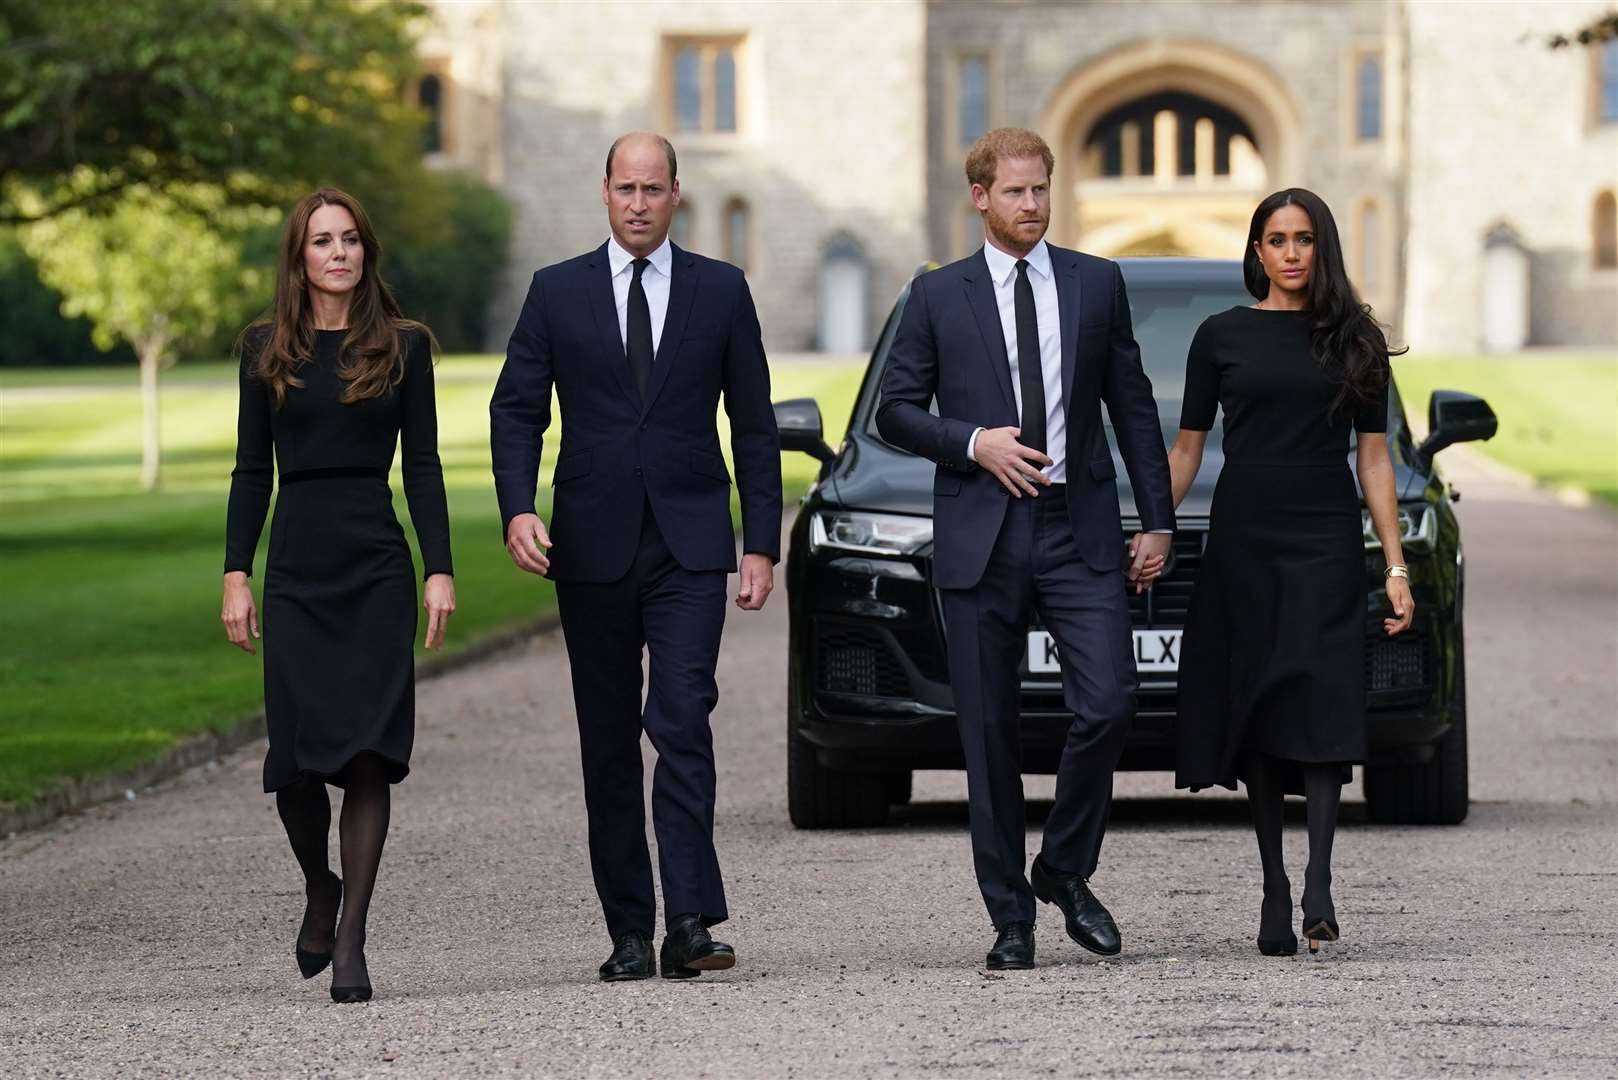 The Princess of Wales, the Prince of Wales and the Duke and Duchess of Sussex walk to meet members of the public at Windsor Castle in Berkshire following the death of Queen Elizabeth II (Kirsty O’Connor/PA)